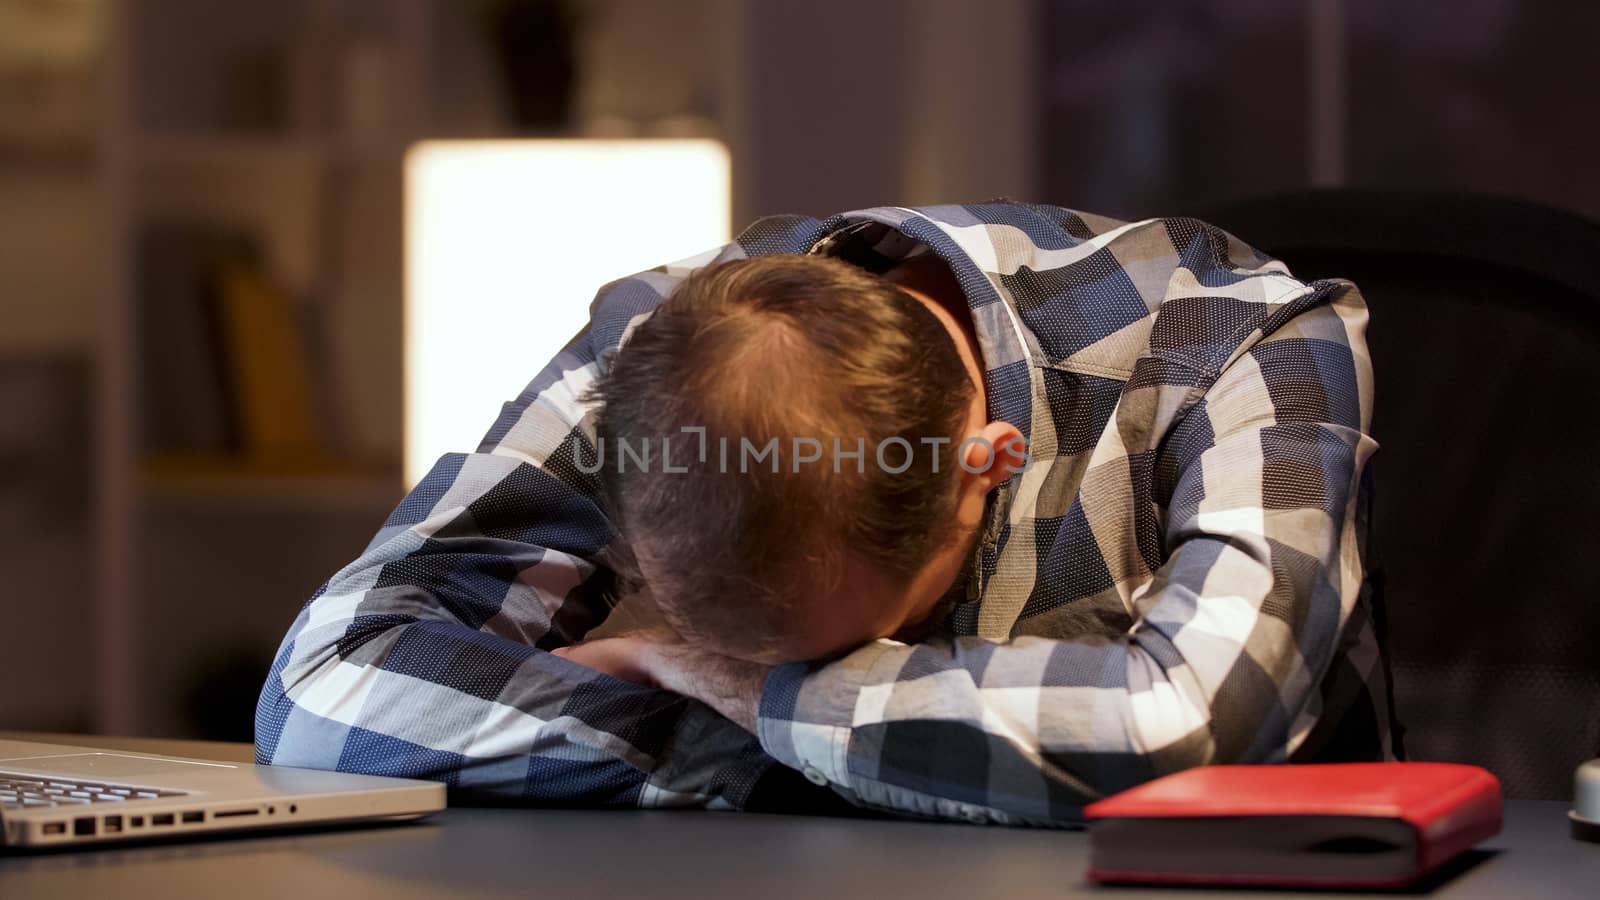 Tired businessman sleeping with head on desk in home office. Overworked entrepreneur.